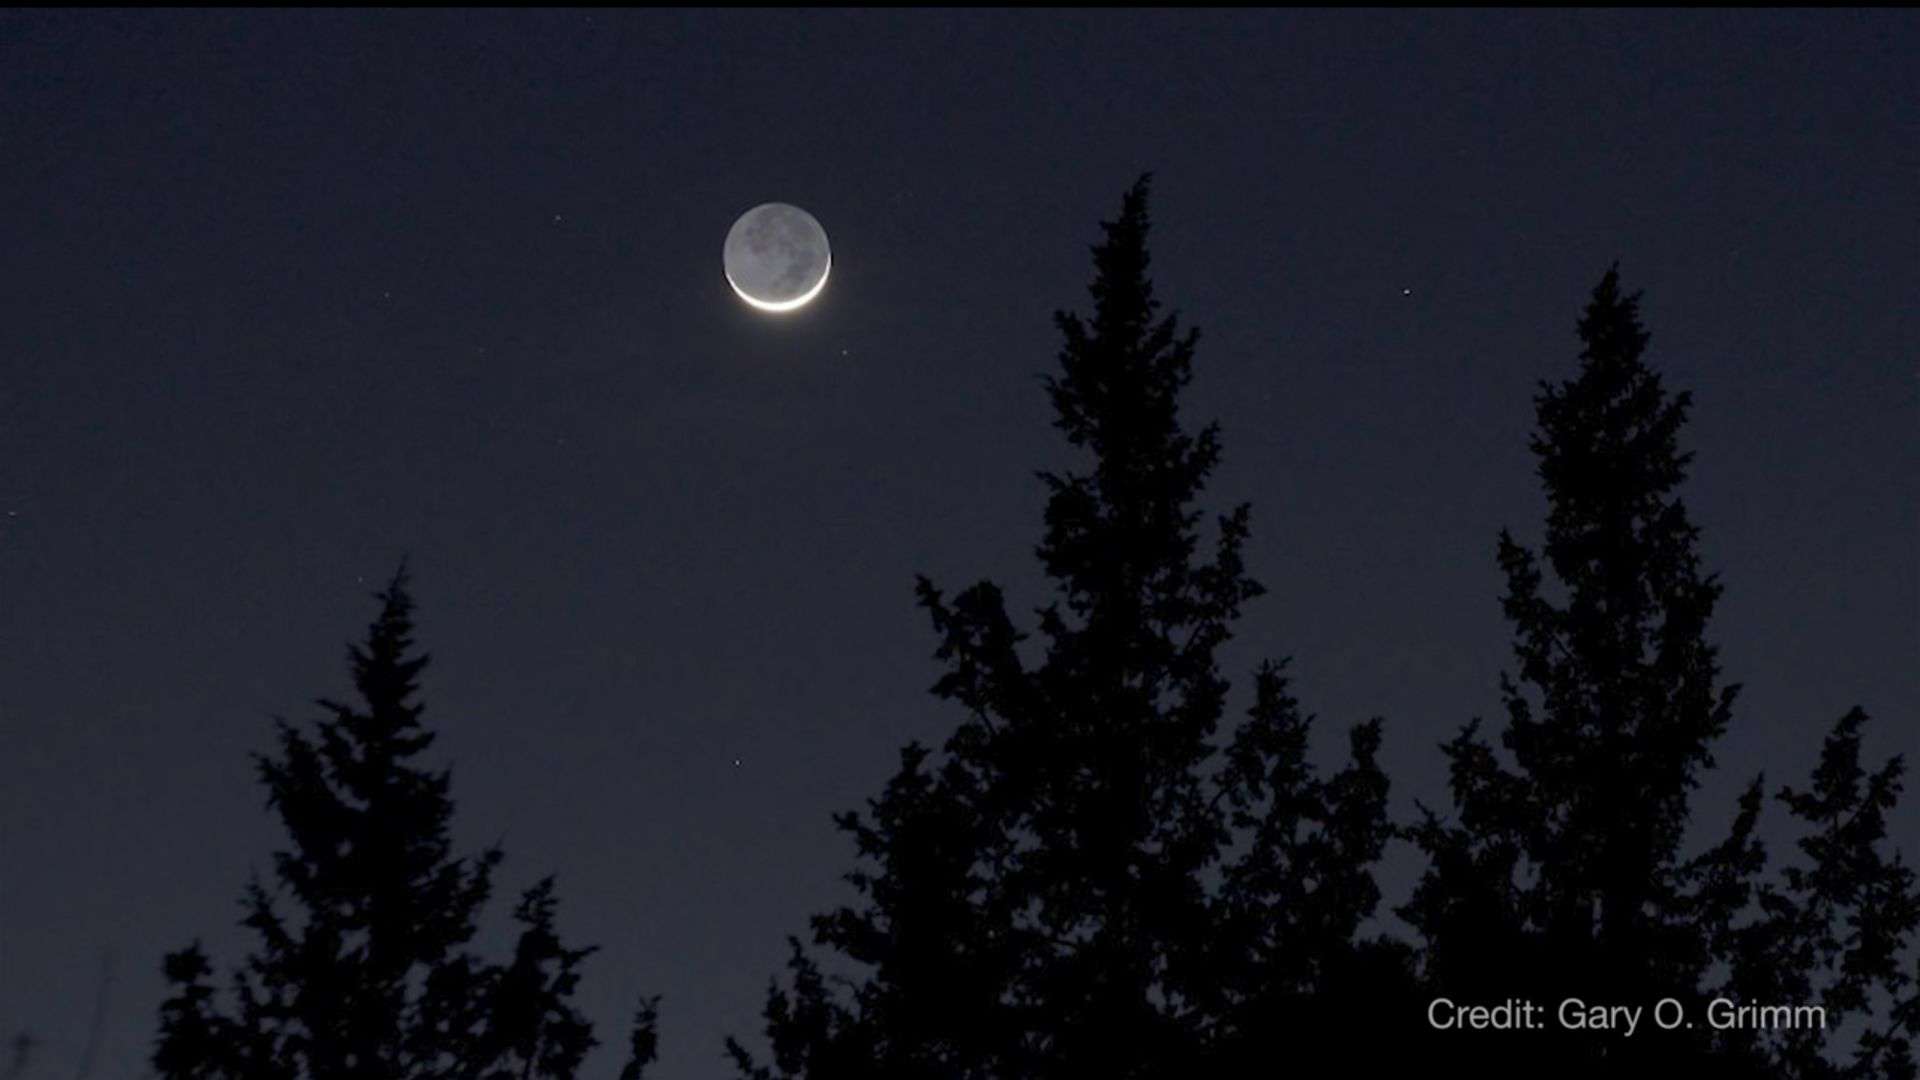 Earthshine is visible on the unlit part of the crescent moon